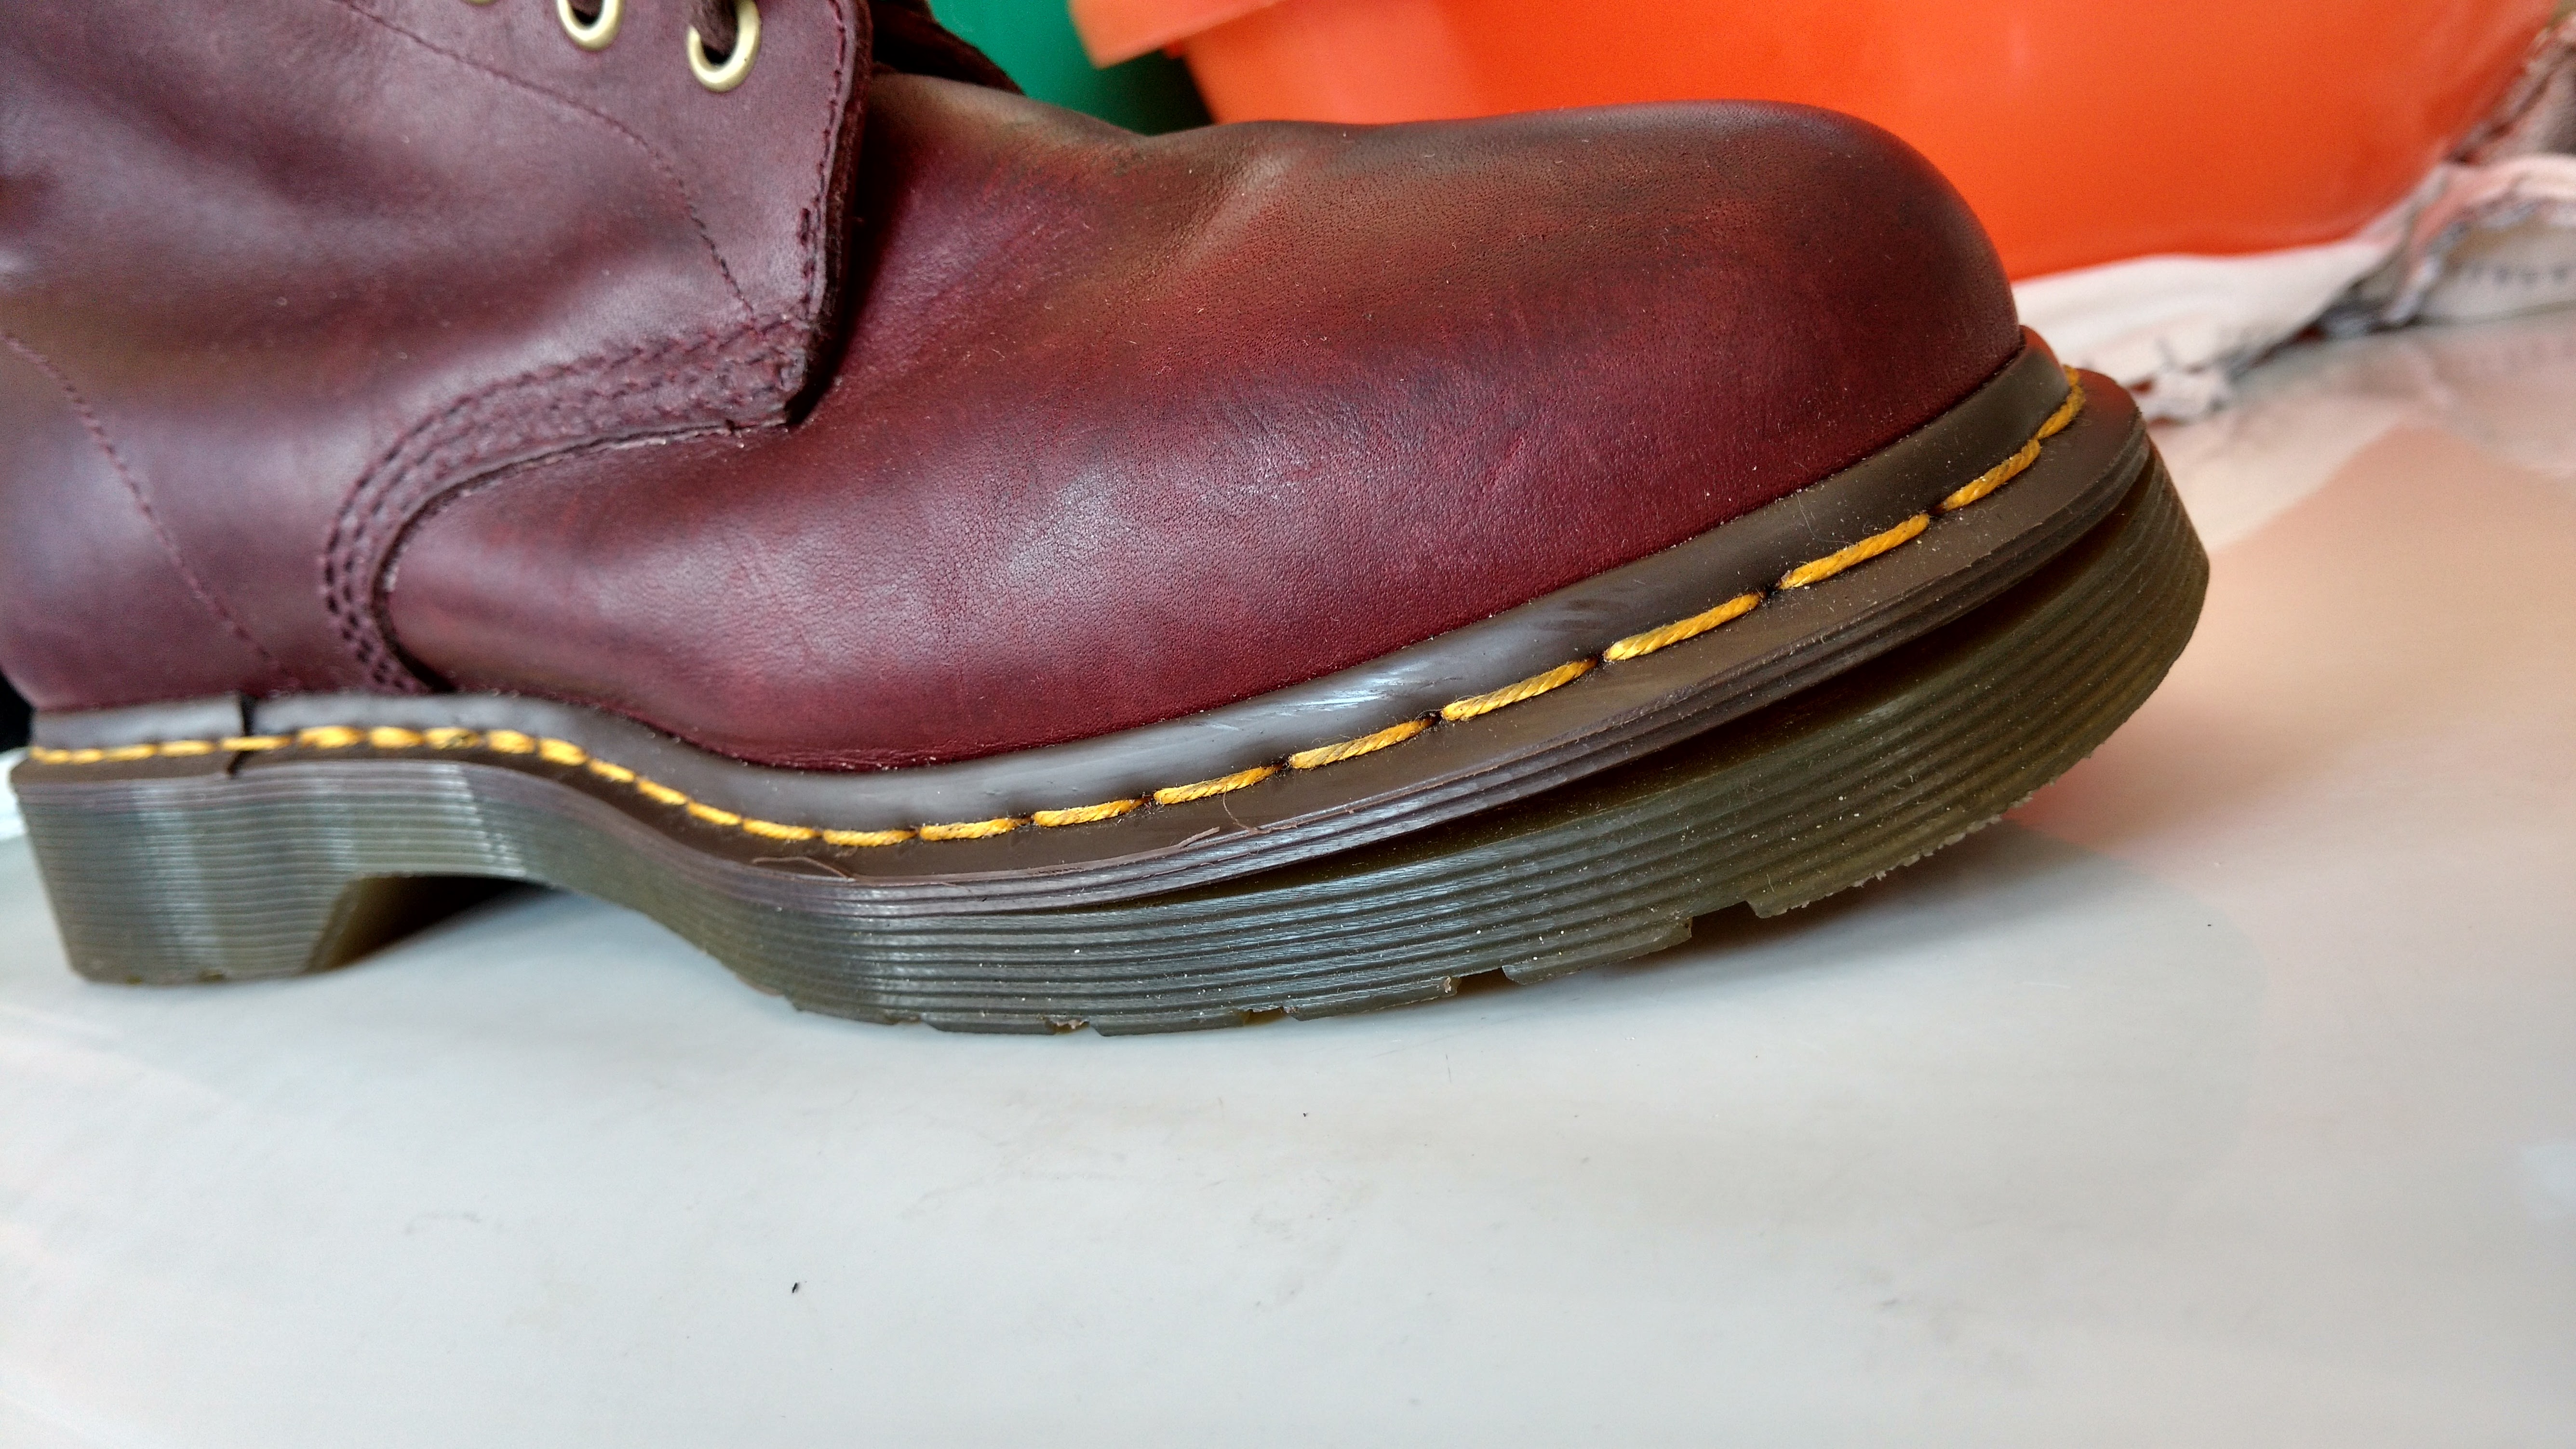 The sole on my Doc Martens boot is splitting. Can this be fixed? |  Styleforum